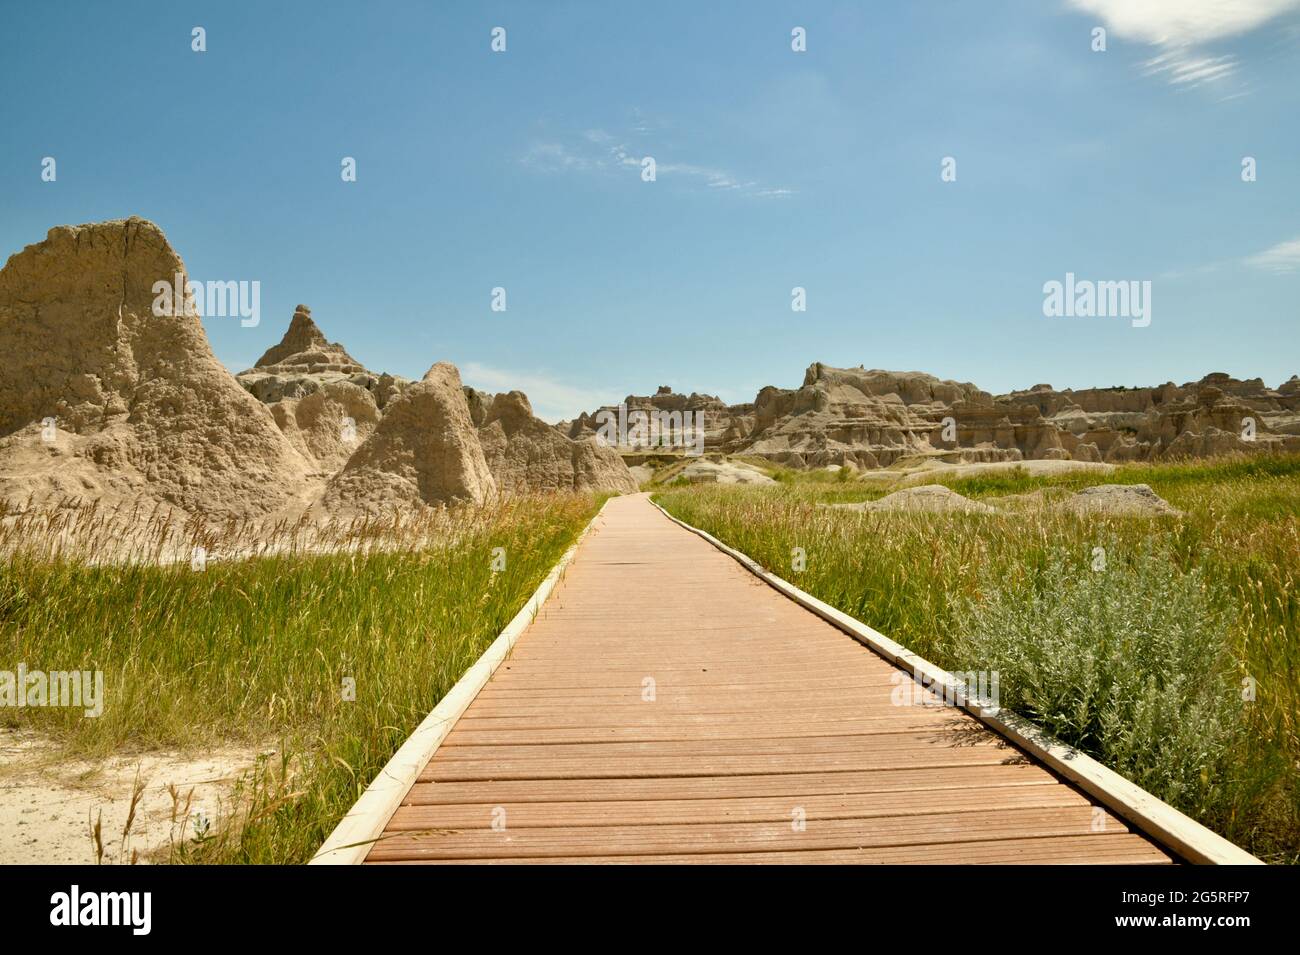 Boardwalk among the Rock Formations, Chadron Formations, in the Badlands National Park Eroded Buttes and Pinnacles in South Dakota, USA Stock Photo